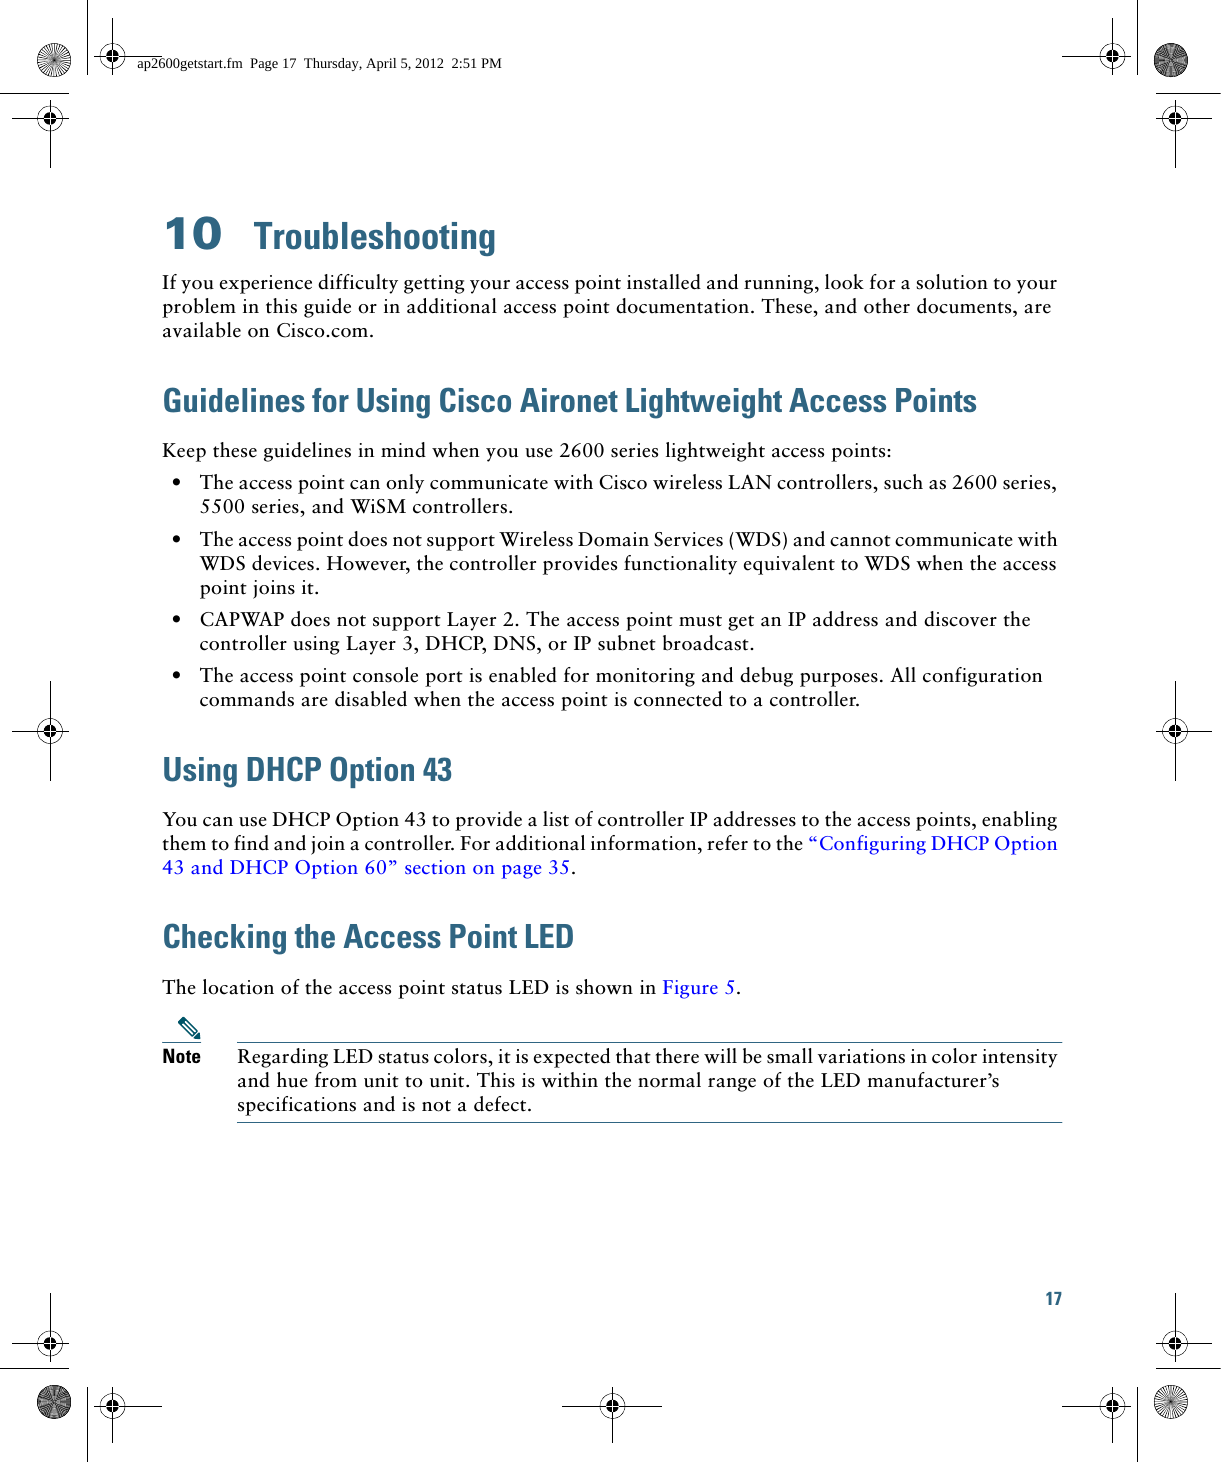 17 10  TroubleshootingIf you experience difficulty getting your access point installed and running, look for a solution to your problem in this guide or in additional access point documentation. These, and other documents, are available on Cisco.com.Guidelines for Using Cisco Aironet Lightweight Access PointsKeep these guidelines in mind when you use 2600 series lightweight access points:  • The access point can only communicate with Cisco wireless LAN controllers, such as 2600 series, 5500 series, and WiSM controllers.  • The access point does not support Wireless Domain Services (WDS) and cannot communicate with WDS devices. However, the controller provides functionality equivalent to WDS when the access point joins it.  • CAPWAP does not support Layer 2. The access point must get an IP address and discover the controller using Layer 3, DHCP, DNS, or IP subnet broadcast.  • The access point console port is enabled for monitoring and debug purposes. All configuration commands are disabled when the access point is connected to a controller. Using DHCP Option 43You can use DHCP Option 43 to provide a list of controller IP addresses to the access points, enabling them to find and join a controller. For additional information, refer to the “Configuring DHCP Option 43 and DHCP Option 60” section on page 35.Checking the Access Point LEDThe location of the access point status LED is shown in Figure 5.Note Regarding LED status colors, it is expected that there will be small variations in color intensity and hue from unit to unit. This is within the normal range of the LED manufacturer’s specifications and is not a defect.ap2600getstart.fm  Page 17  Thursday, April 5, 2012  2:51 PM